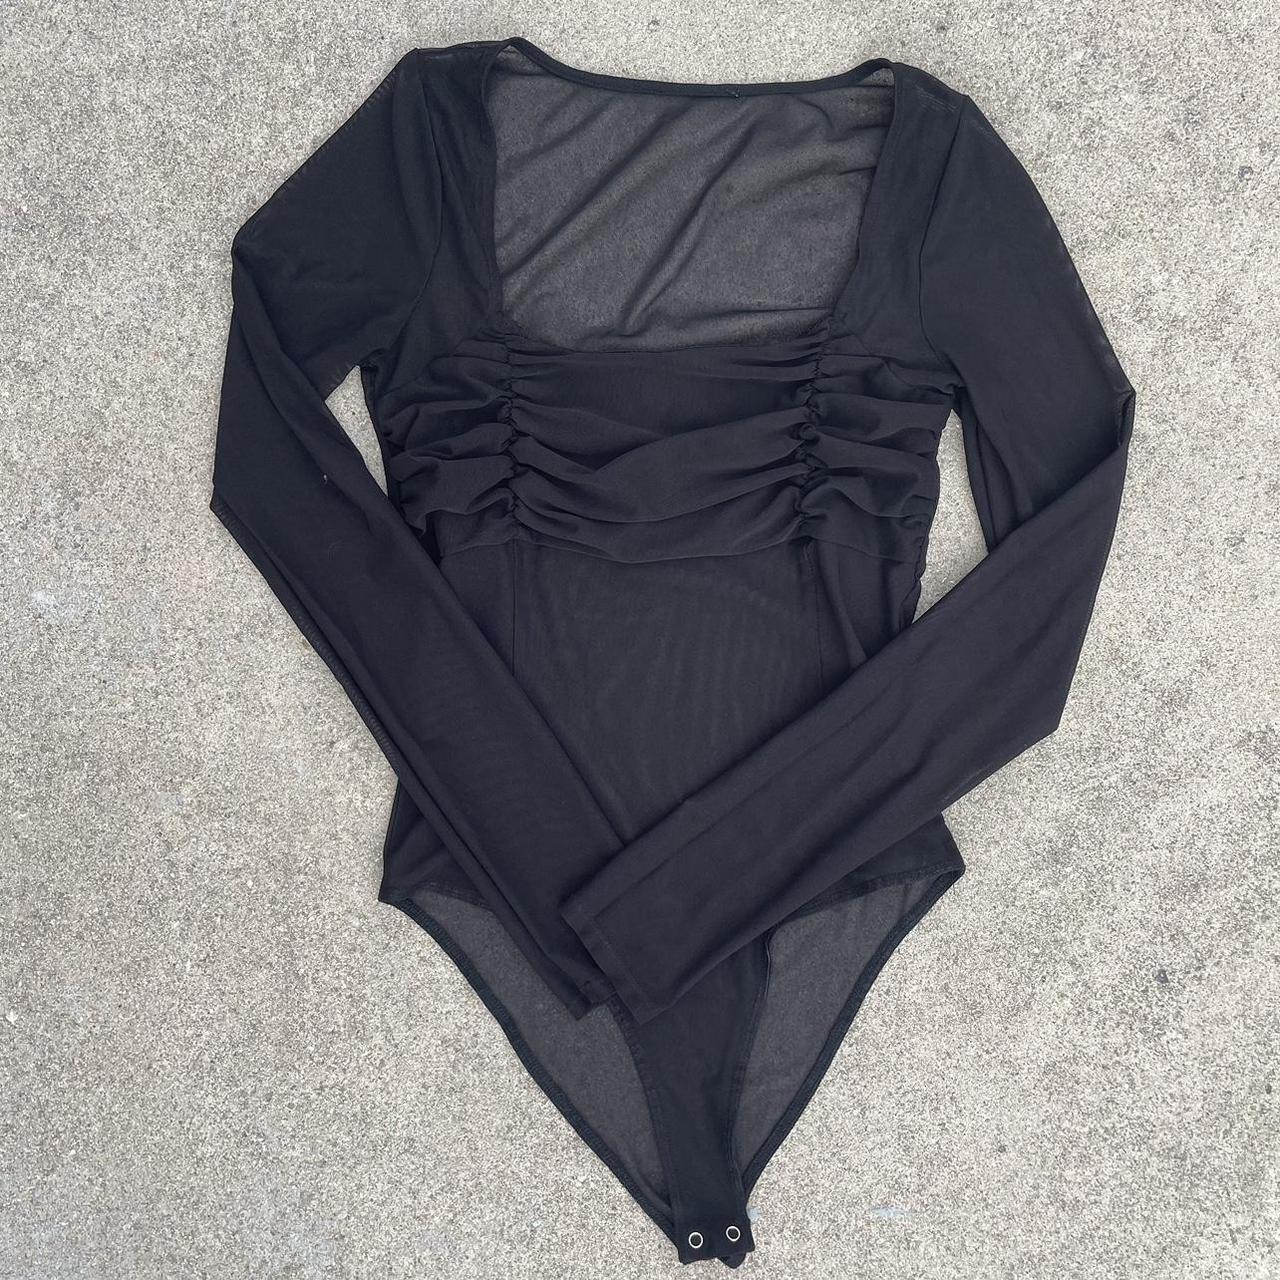 black sheer one piece/body suit with button... - Depop